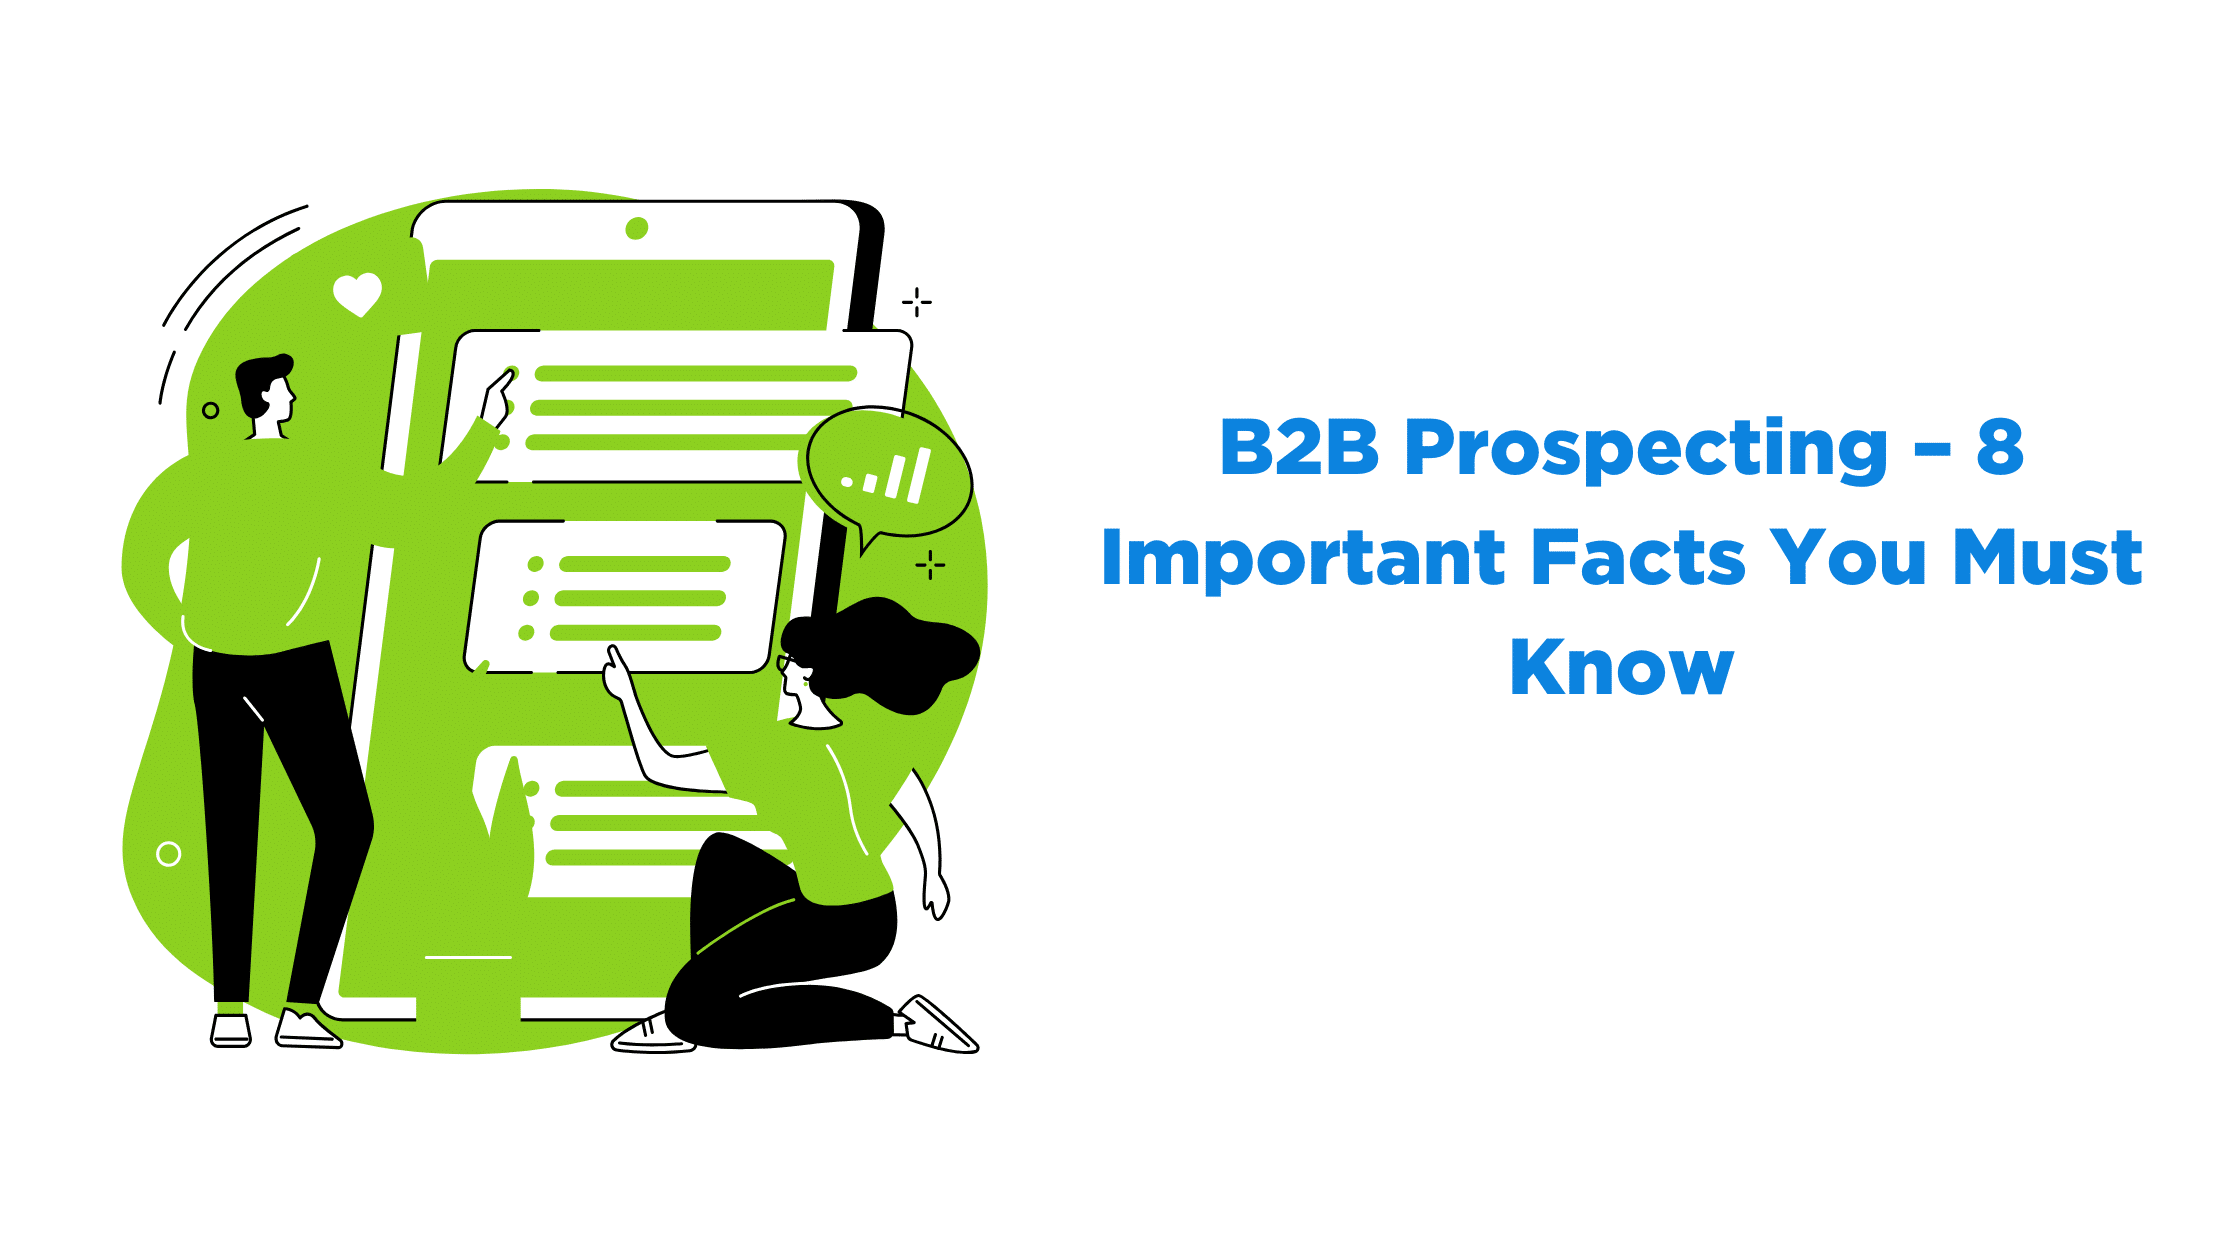 B2B Prospecting – 8 Important Facts You Must Know